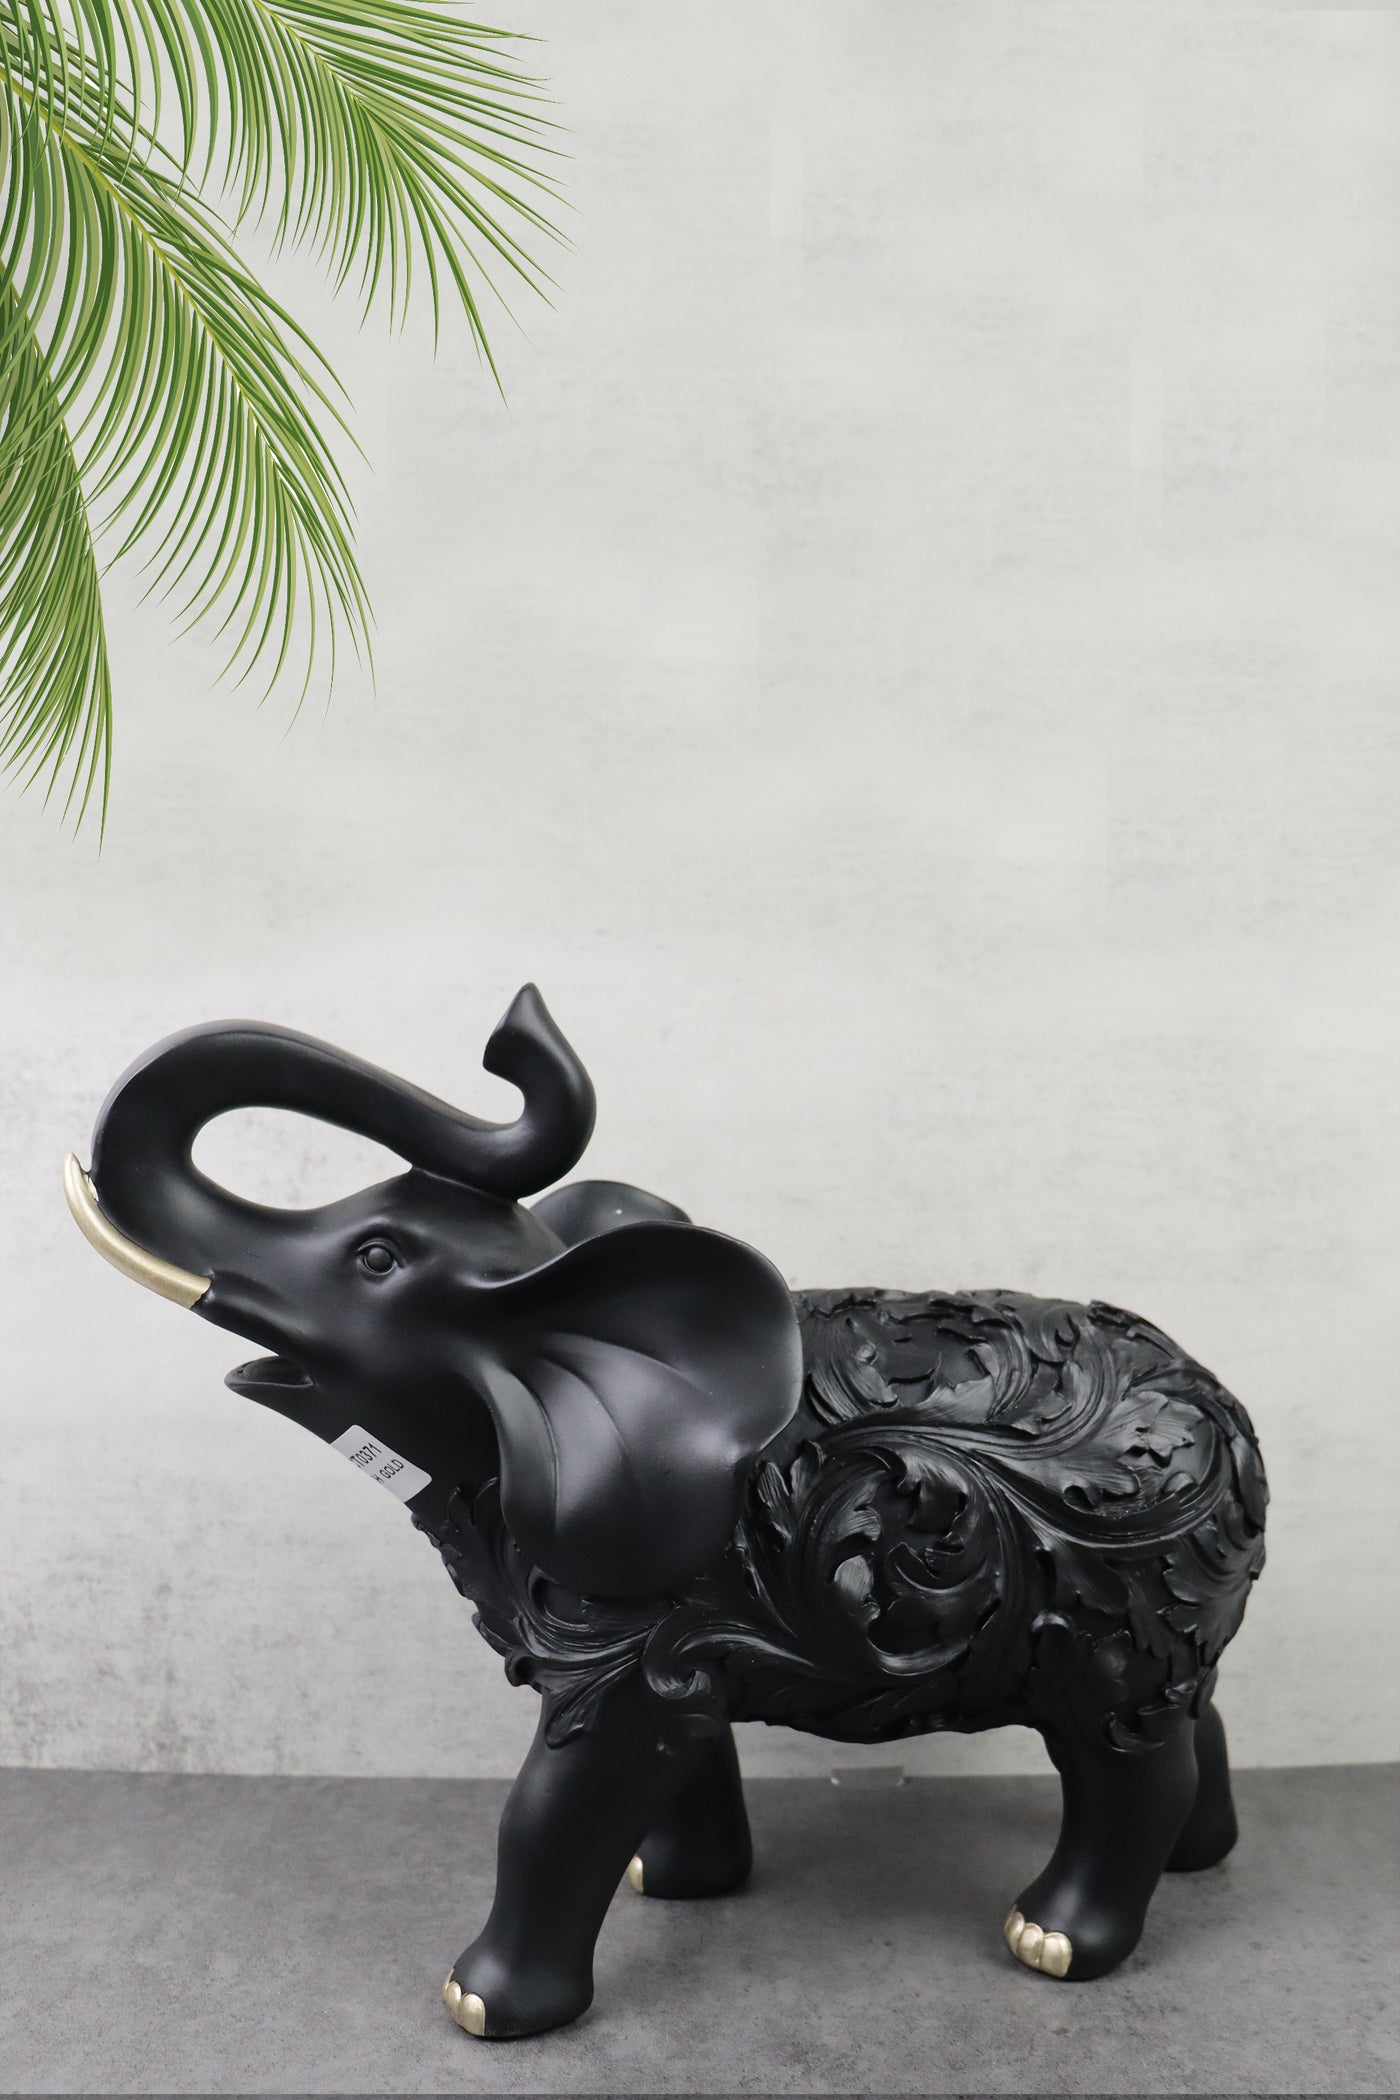 Carved Elephant statue for your home or office decor